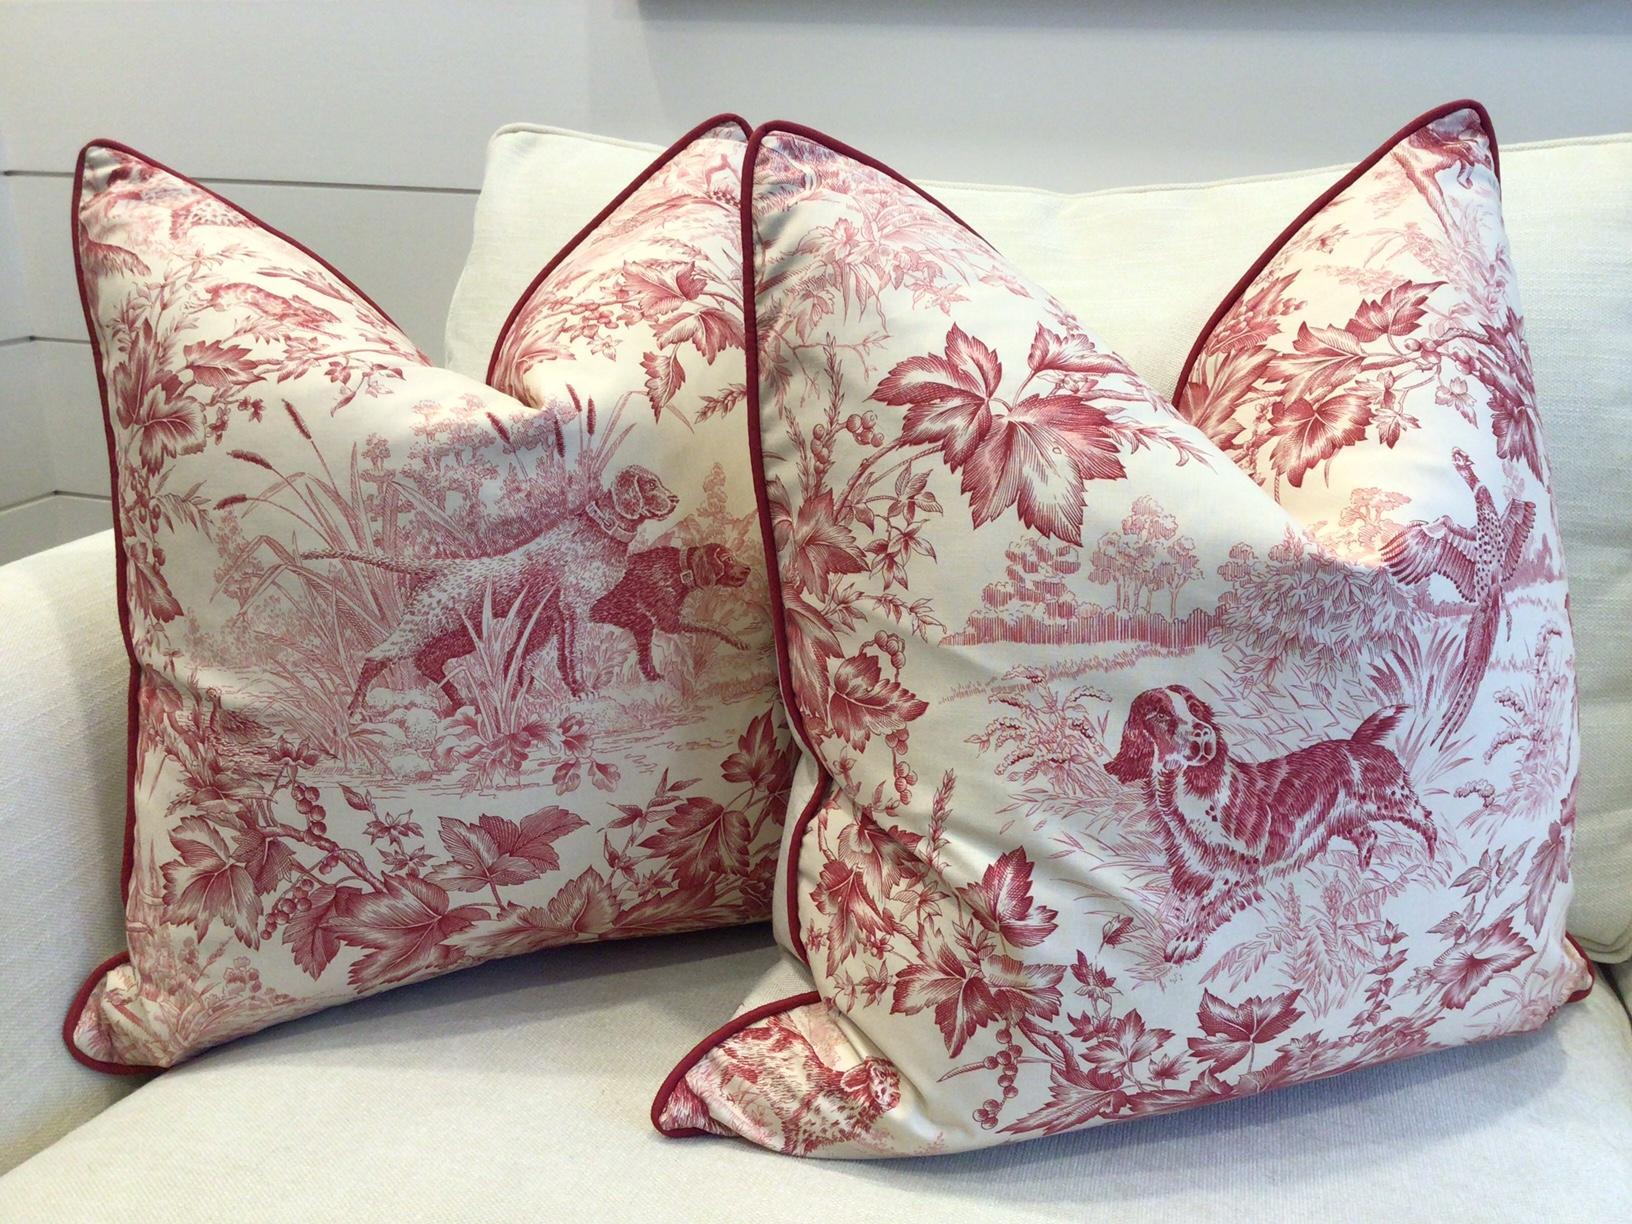 A classic! Hunting Toile from Brunschwig and Fils in red and cream features a printed fabric depicting birds and hunting dogs. Colors are soft red on cream and have been further enhanced with a soft cranberry cord and coordinating linen back.

One